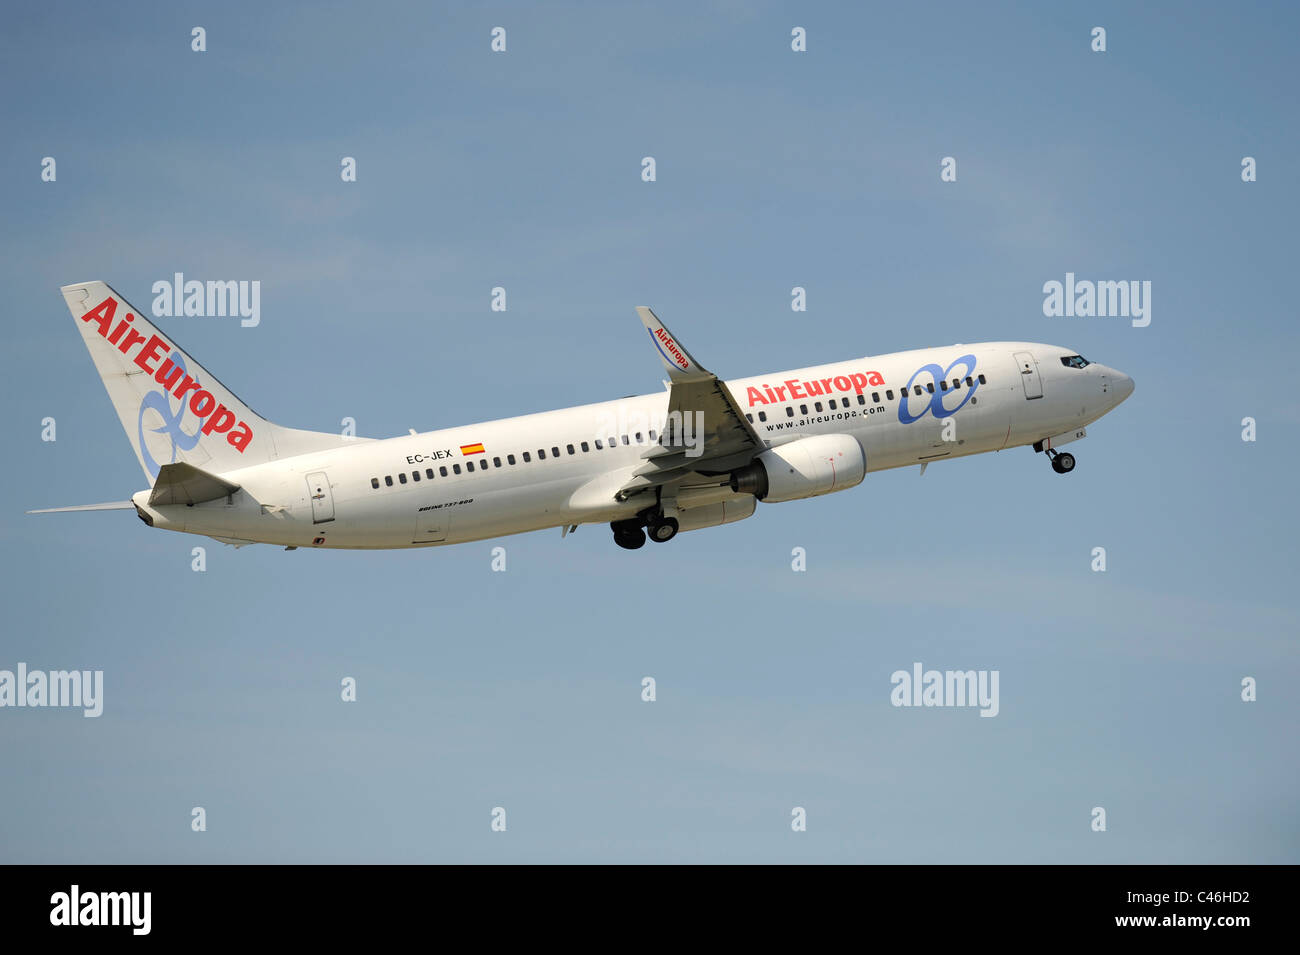 airplane Boeing 737-800 of Spanish airline AirEuropa at take-off from airport Munich in Germany Stock Photo